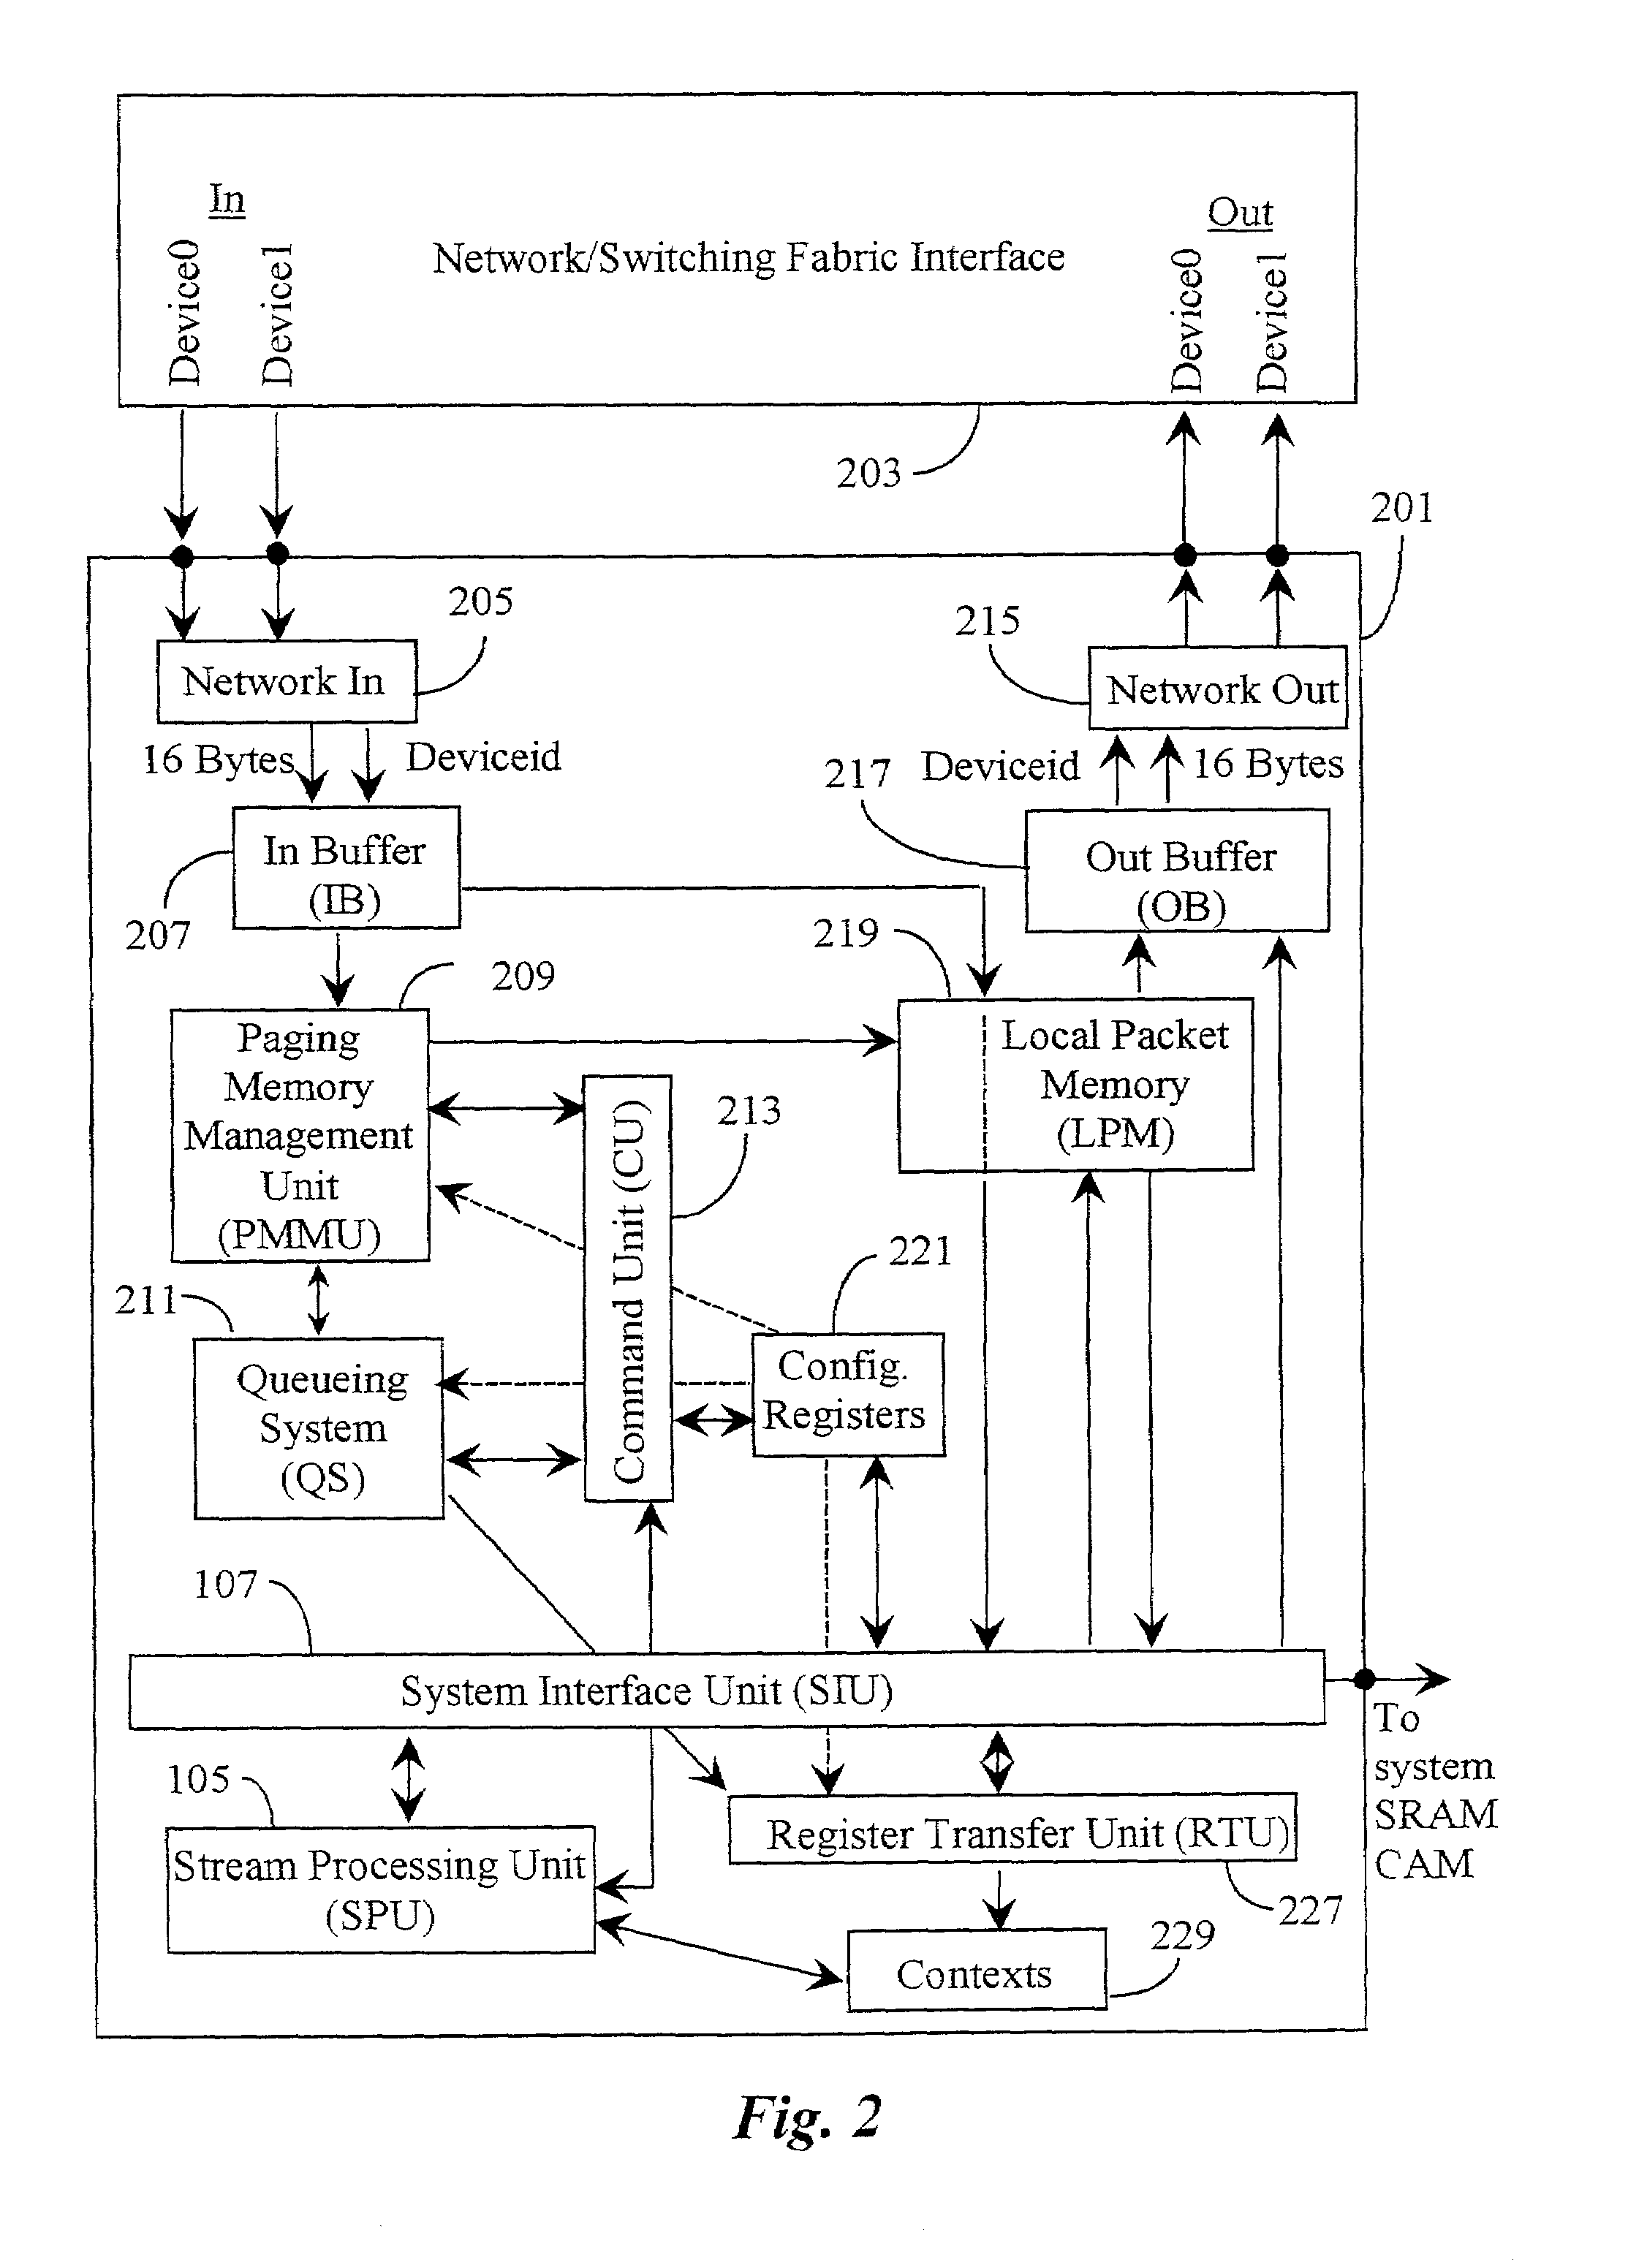 Functional validation of a packet management unit